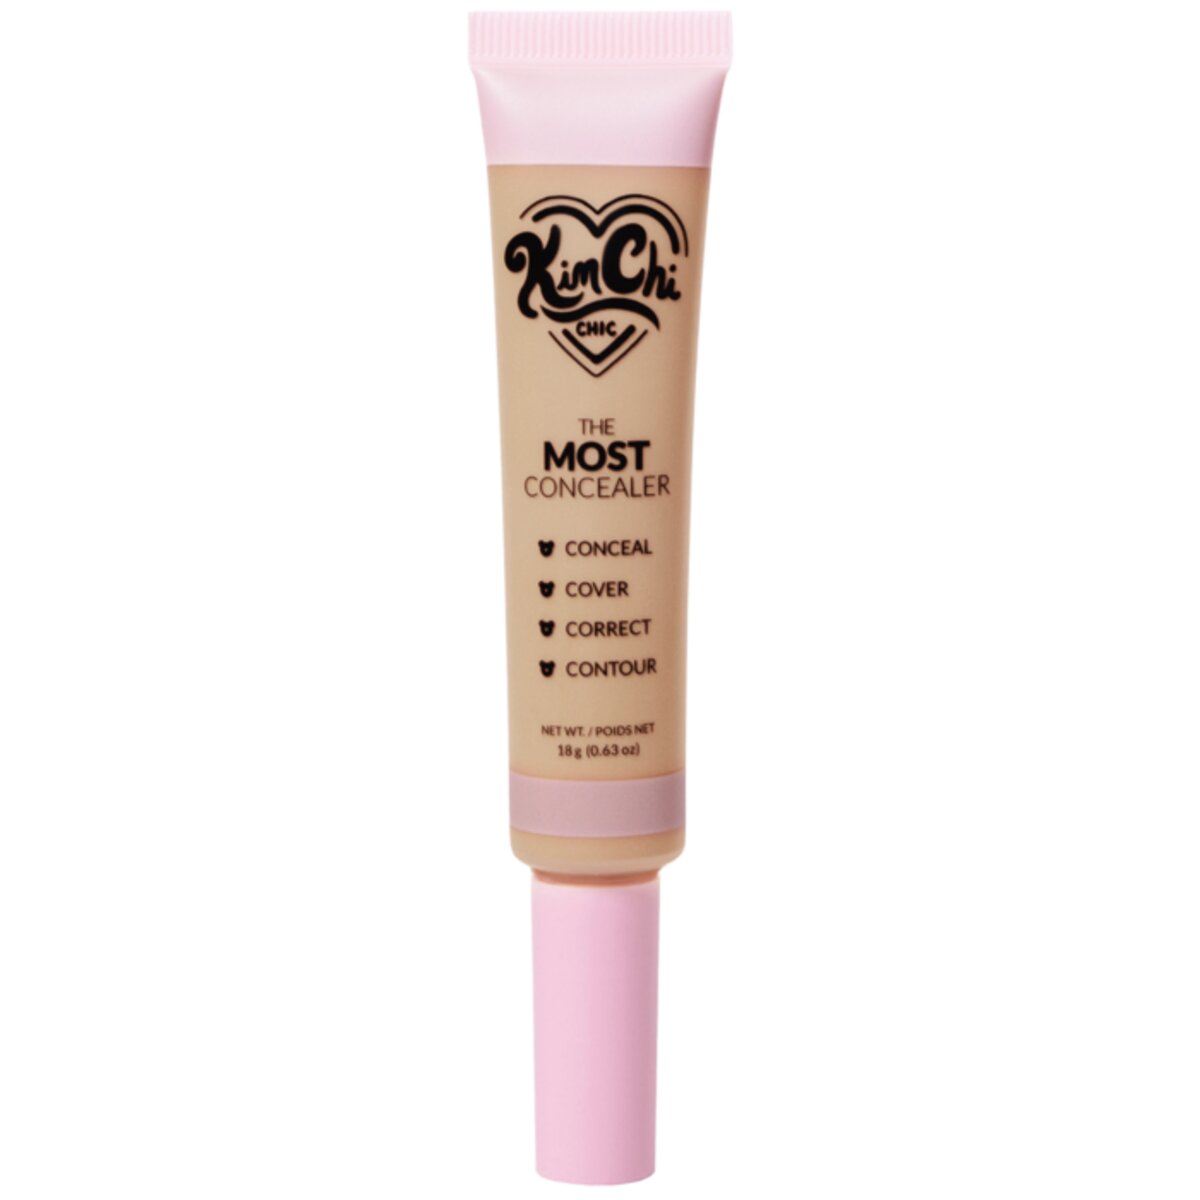 CORRECTOR THE MOST CONCEALER GOLDEN SAND - KIMCHI CHIC